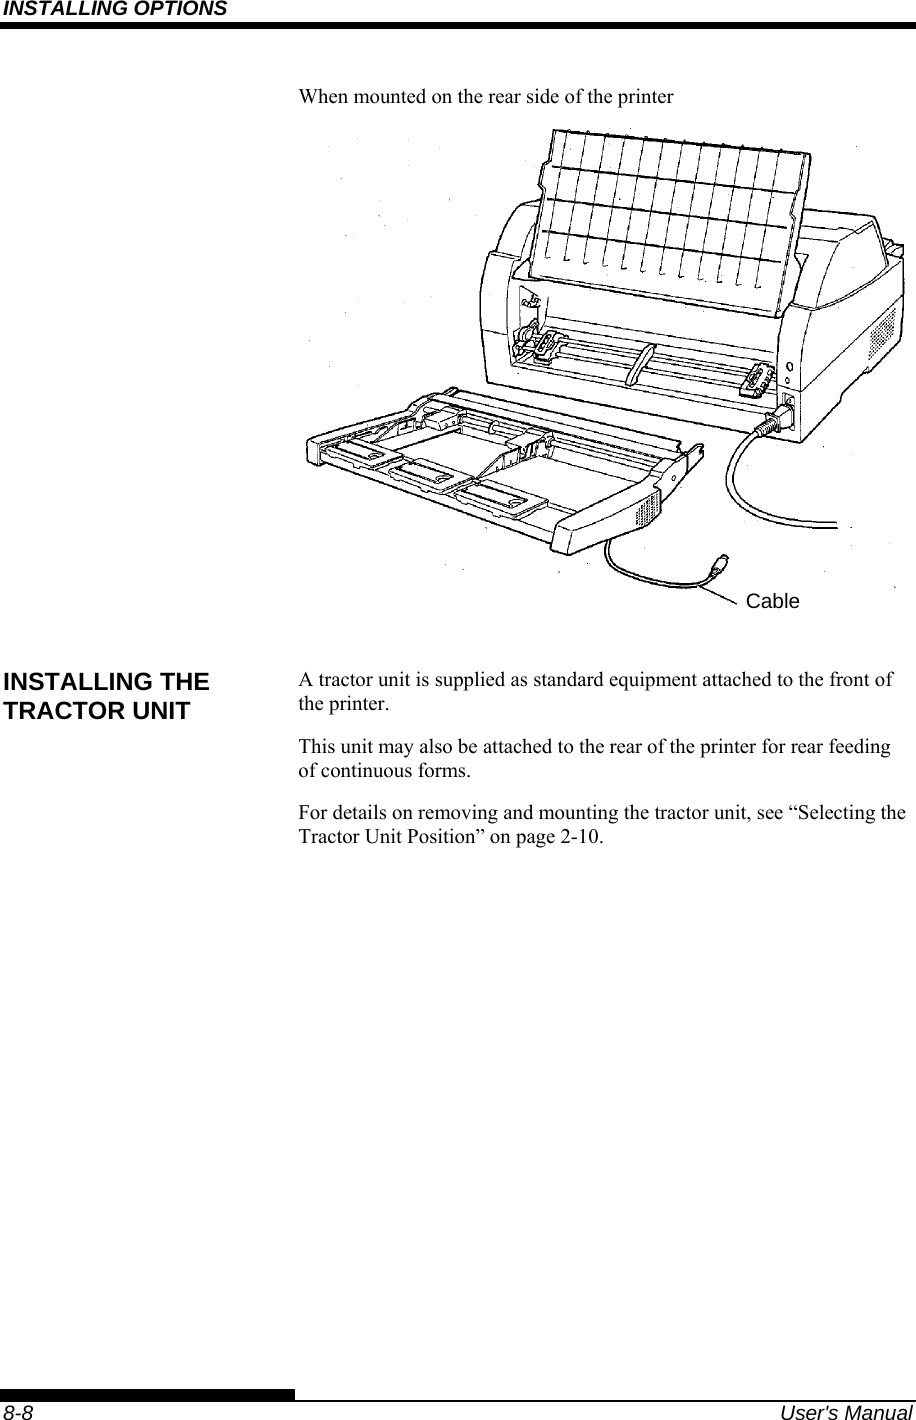 INSTALLING OPTIONS    8-8  User&apos;s Manual When mounted on the rear side of the printer   A tractor unit is supplied as standard equipment attached to the front of the printer.   This unit may also be attached to the rear of the printer for rear feeding of continuous forms. For details on removing and mounting the tractor unit, see “Selecting the Tractor Unit Position” on page 2-10.   INSTALLING THE TRACTOR UNIT Cable 